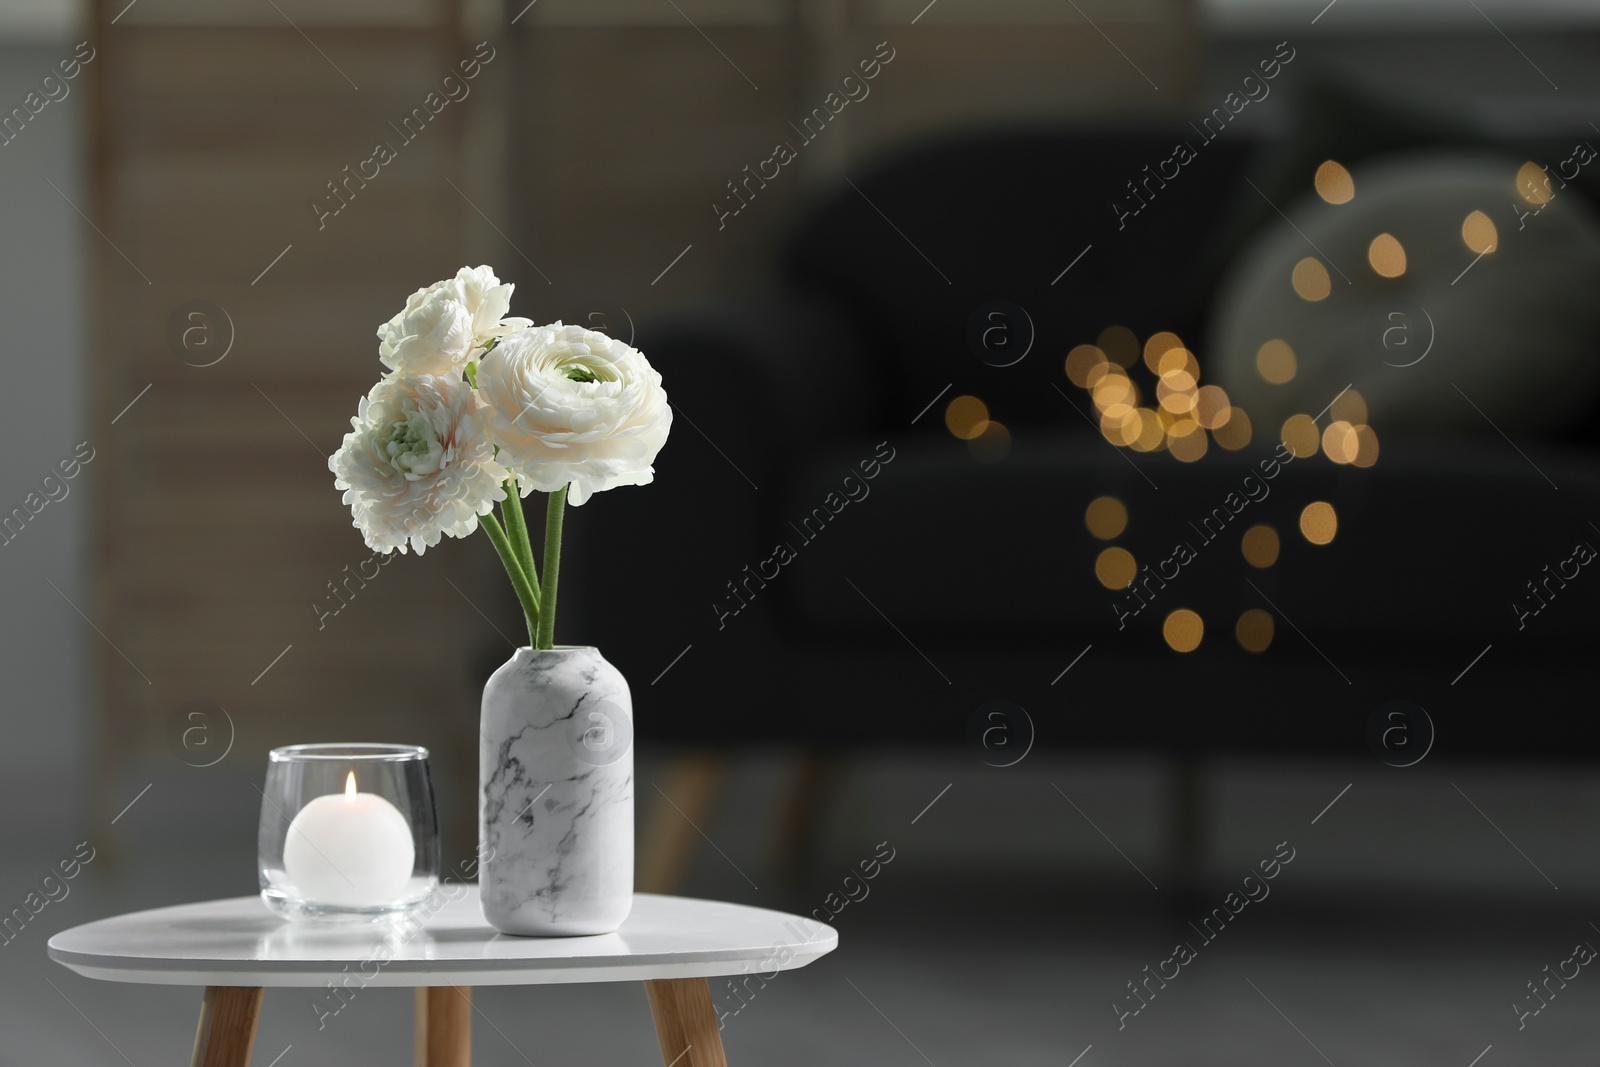 Photo of Vase with beautiful white flowers and burning candle on table in room, bokeh effect. Stylish interior design